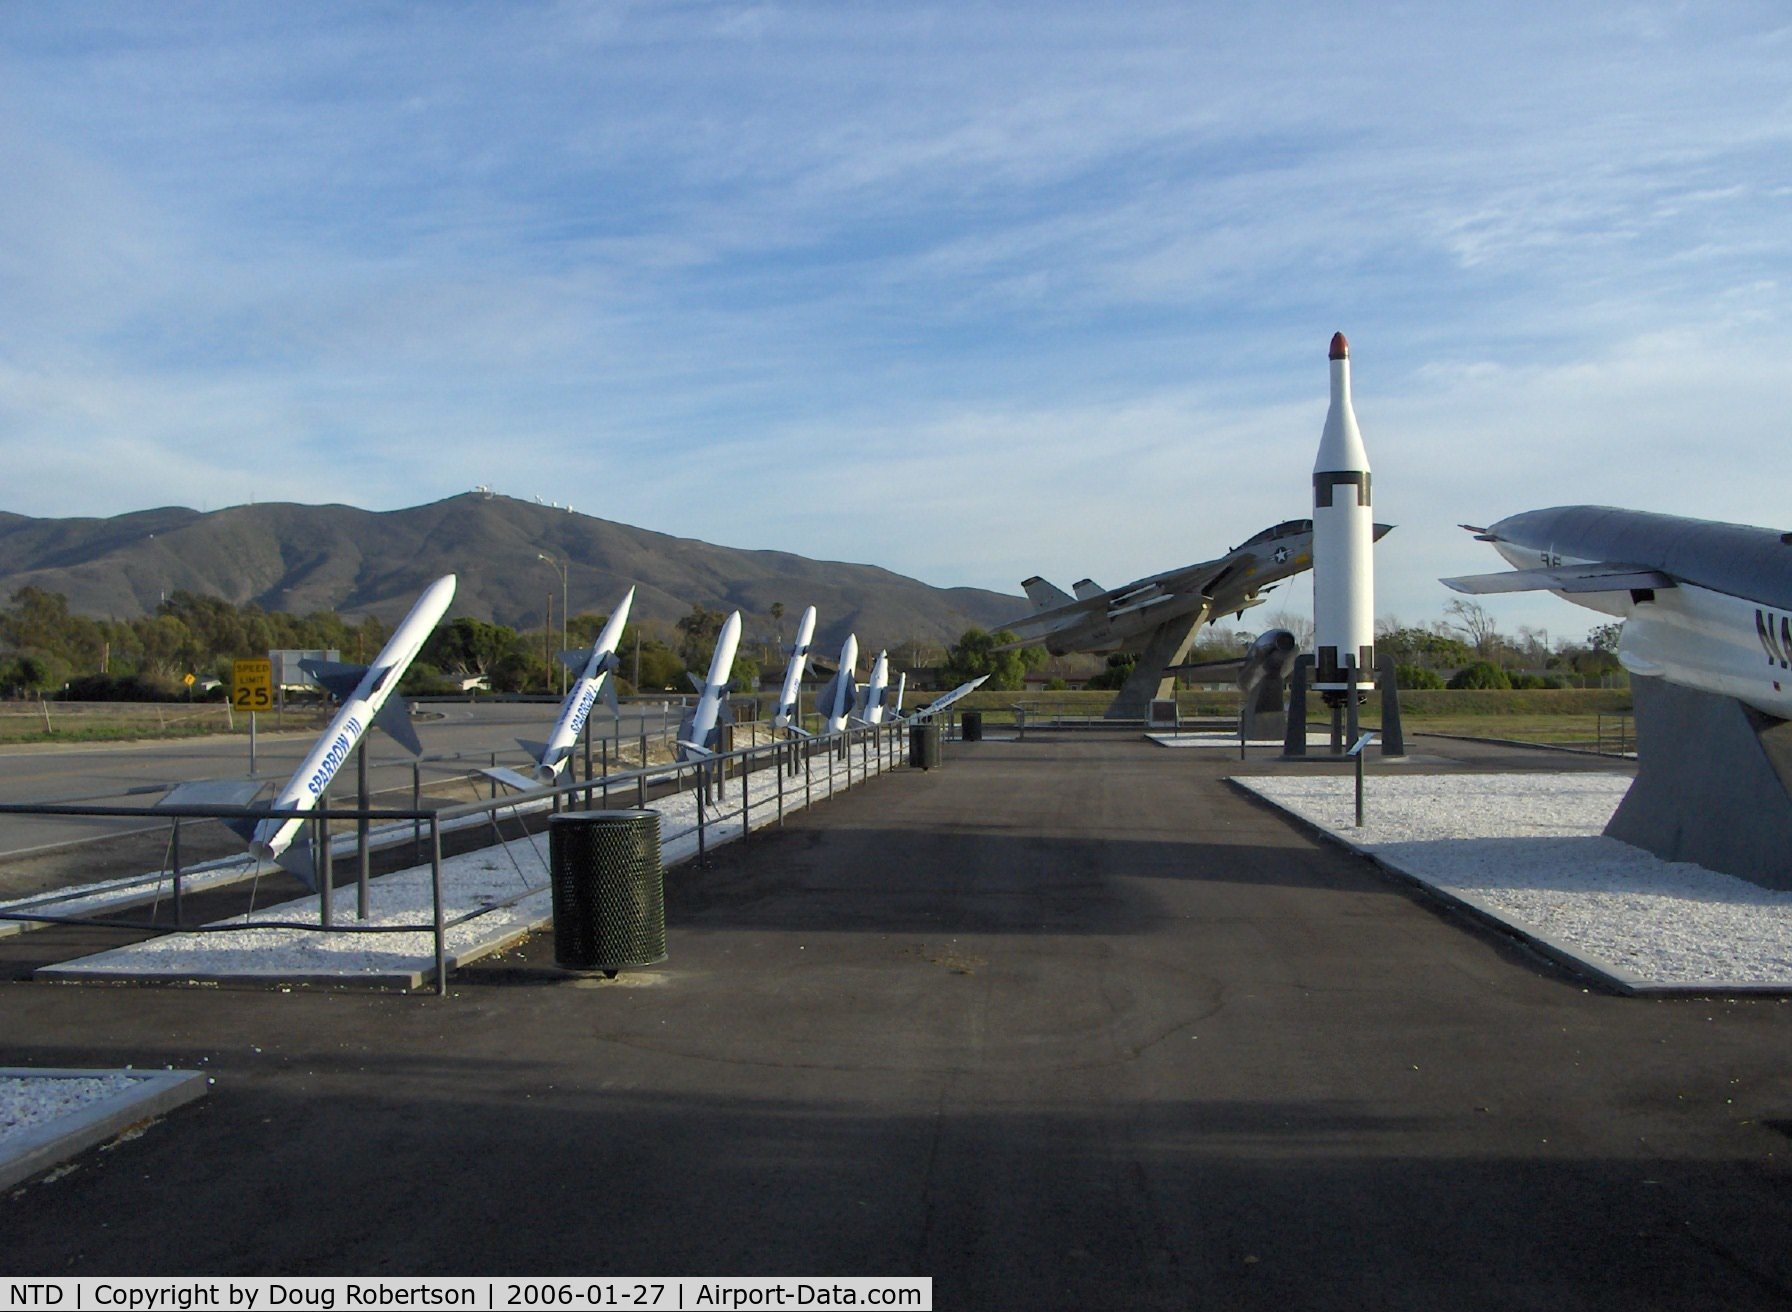 Point Mugu Nas (naval Base Ventura Co) Airport (NTD) - Missile Park, mounted F-14A TOMCAT BuNo.158623, tall vertical POLARIS, Point Mugu housing and 1,567 ft. instrumented Laguna Peak in background